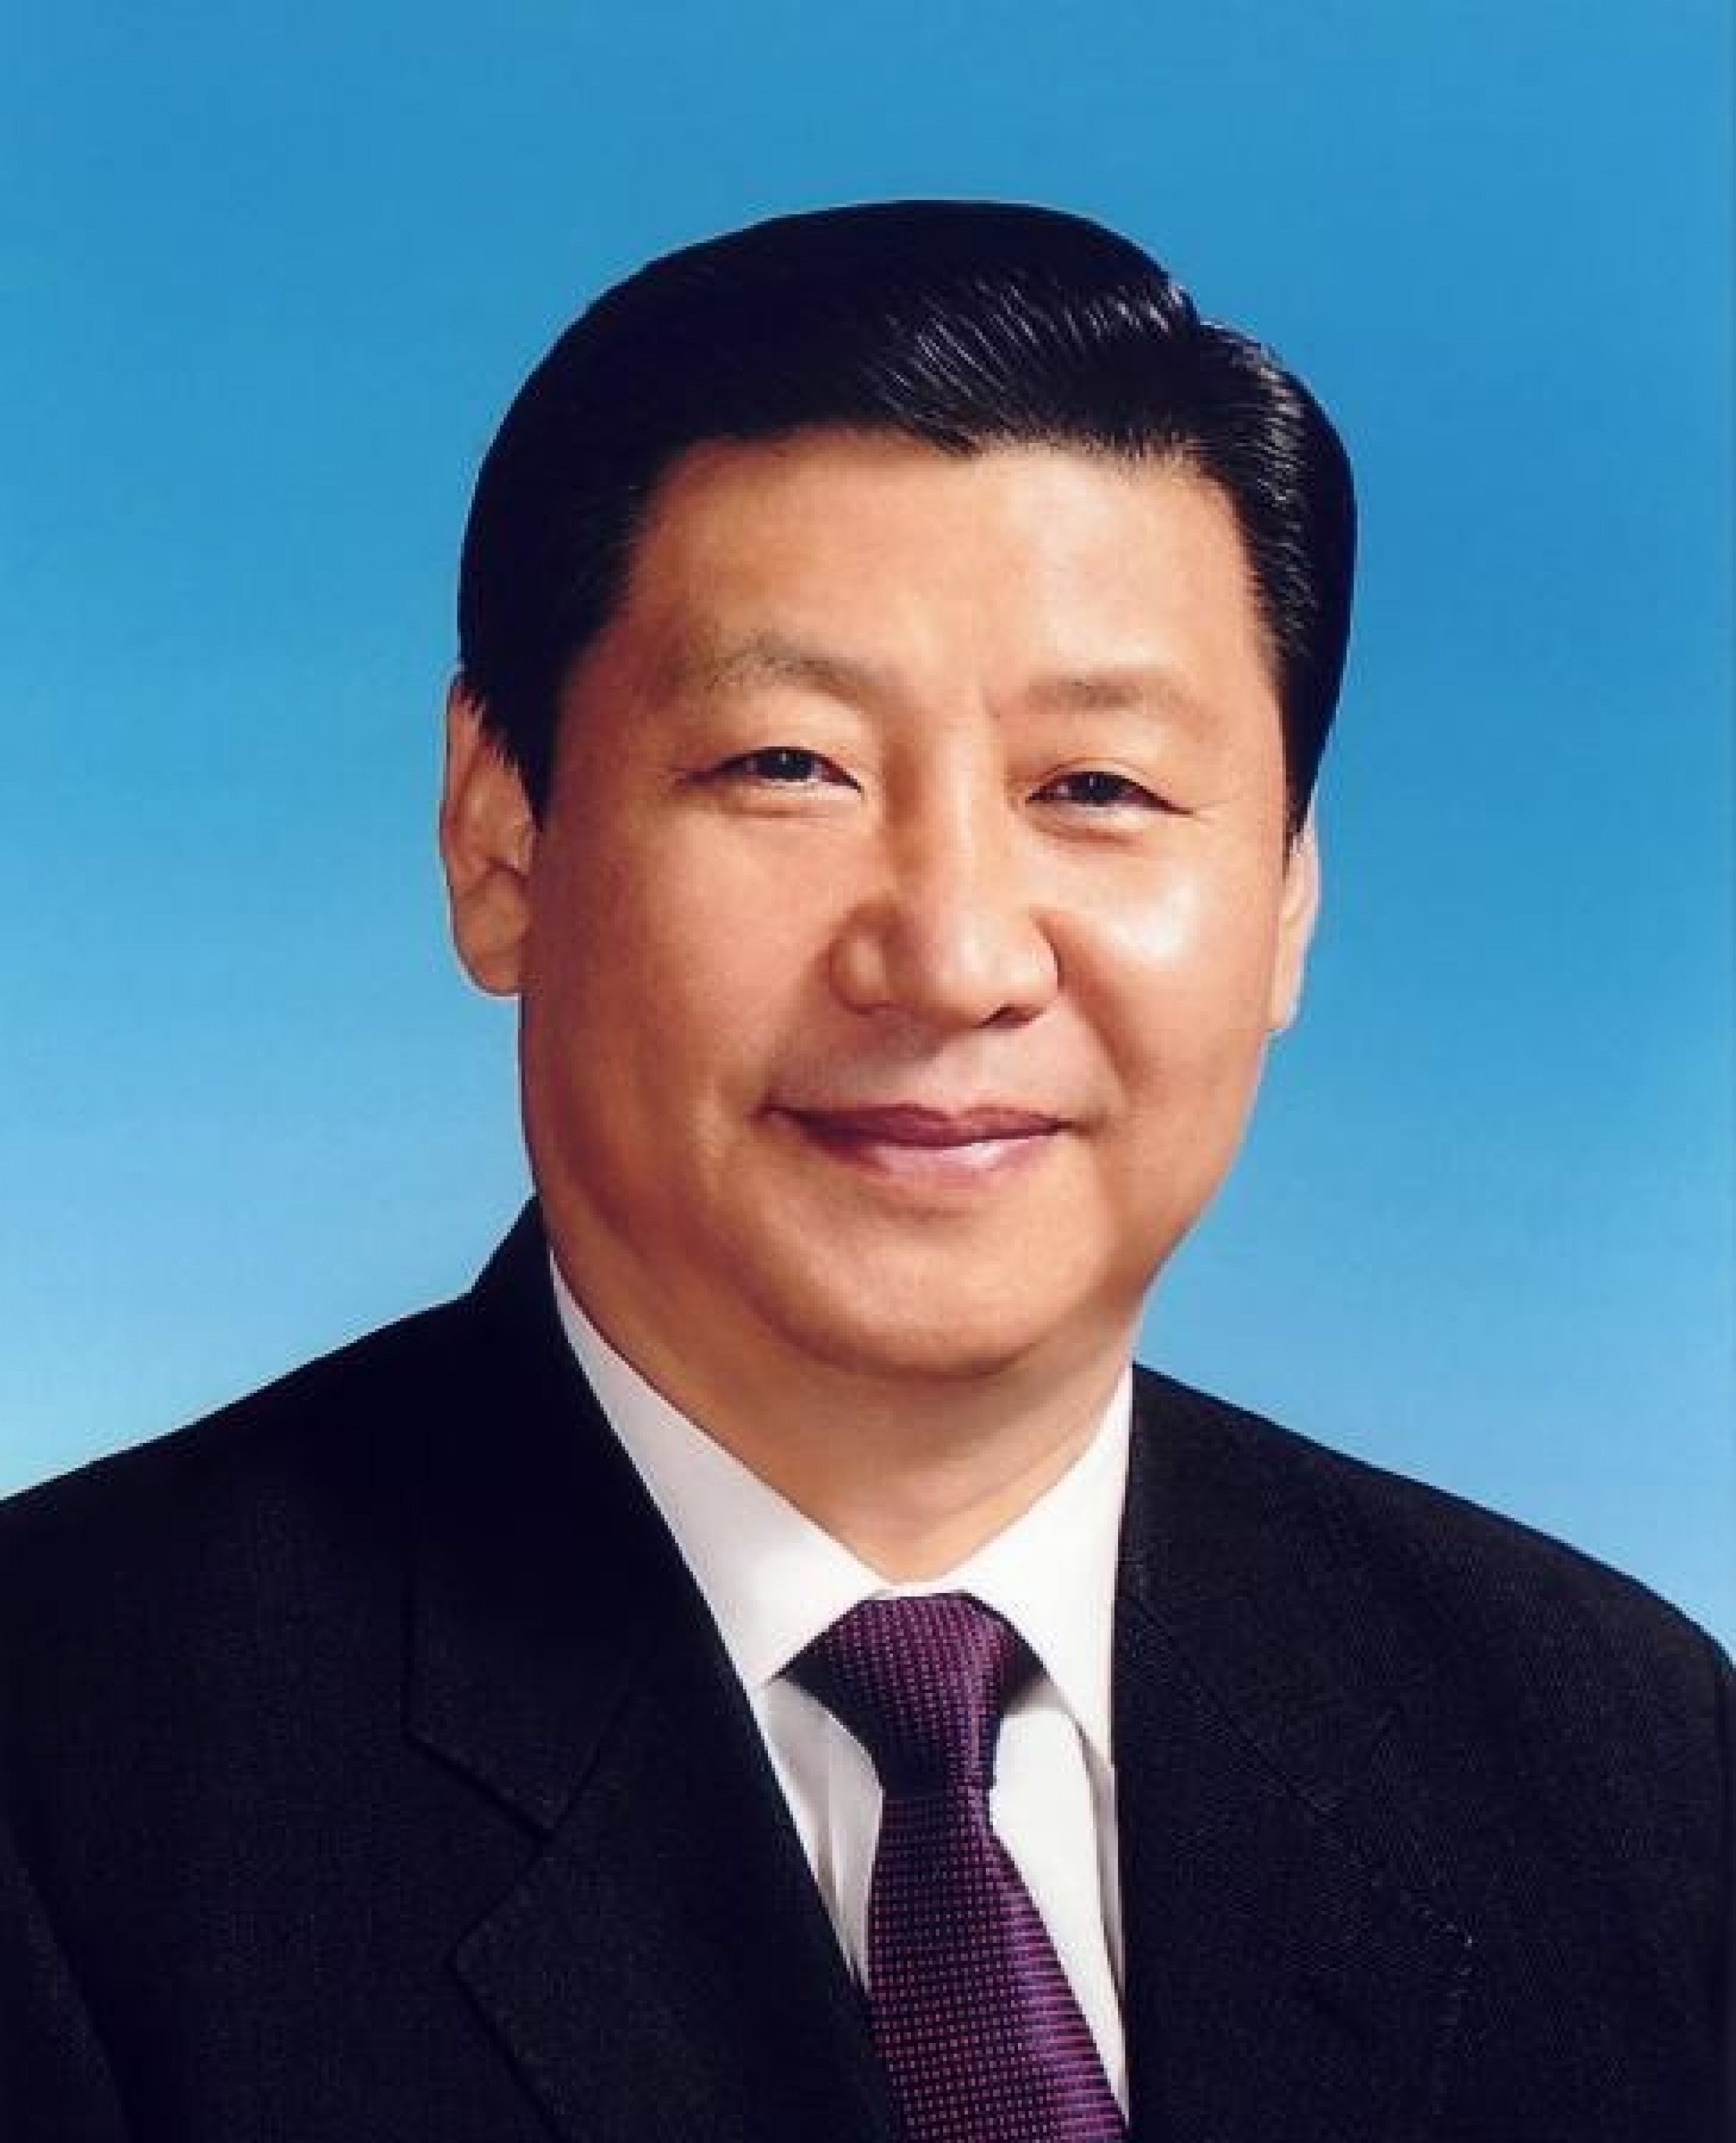 xi-jinping-suffered-heart-attack-report-ibtimes